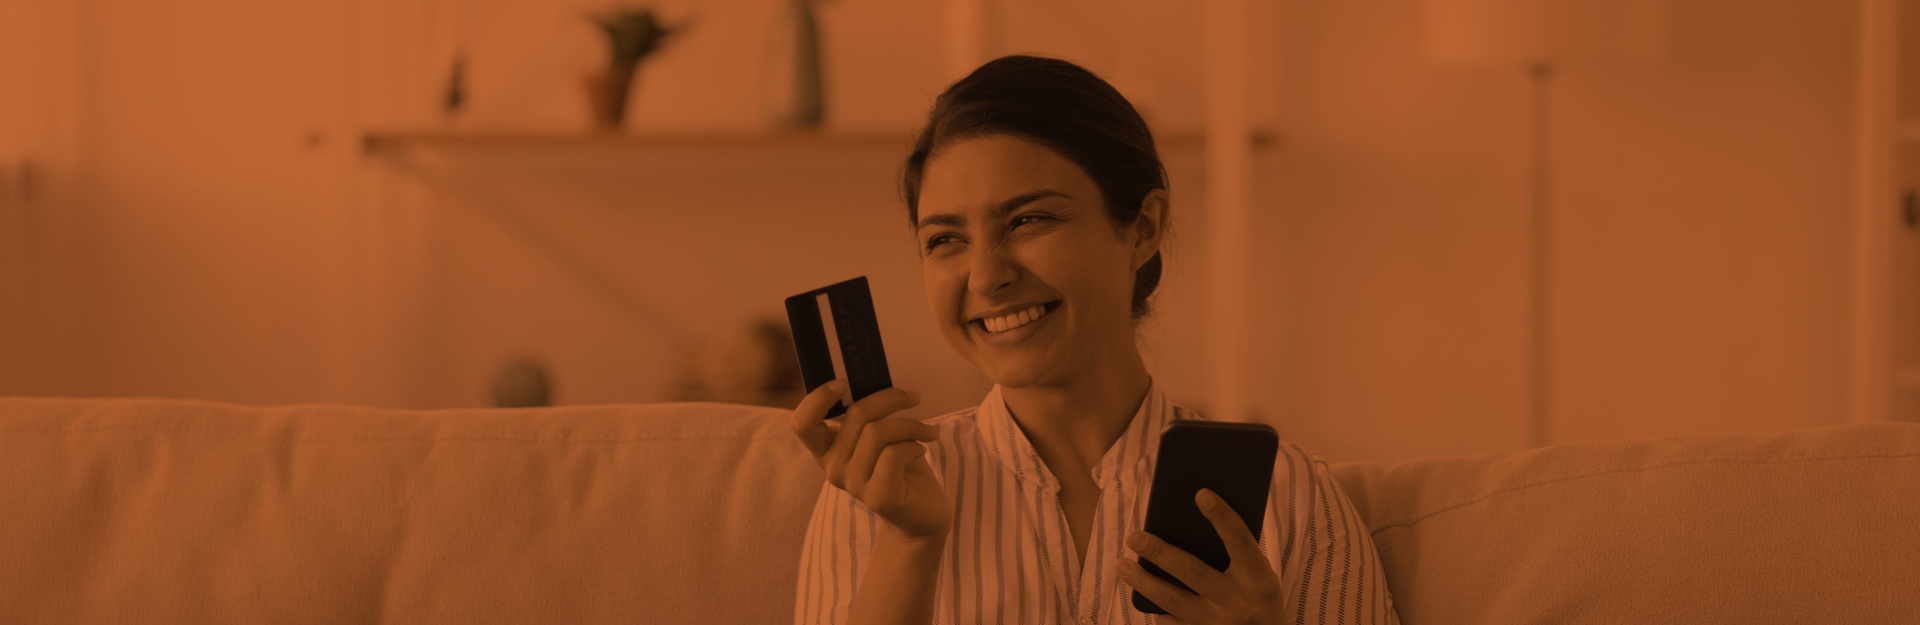 woman smiling and holding credit card and cell phone in hands